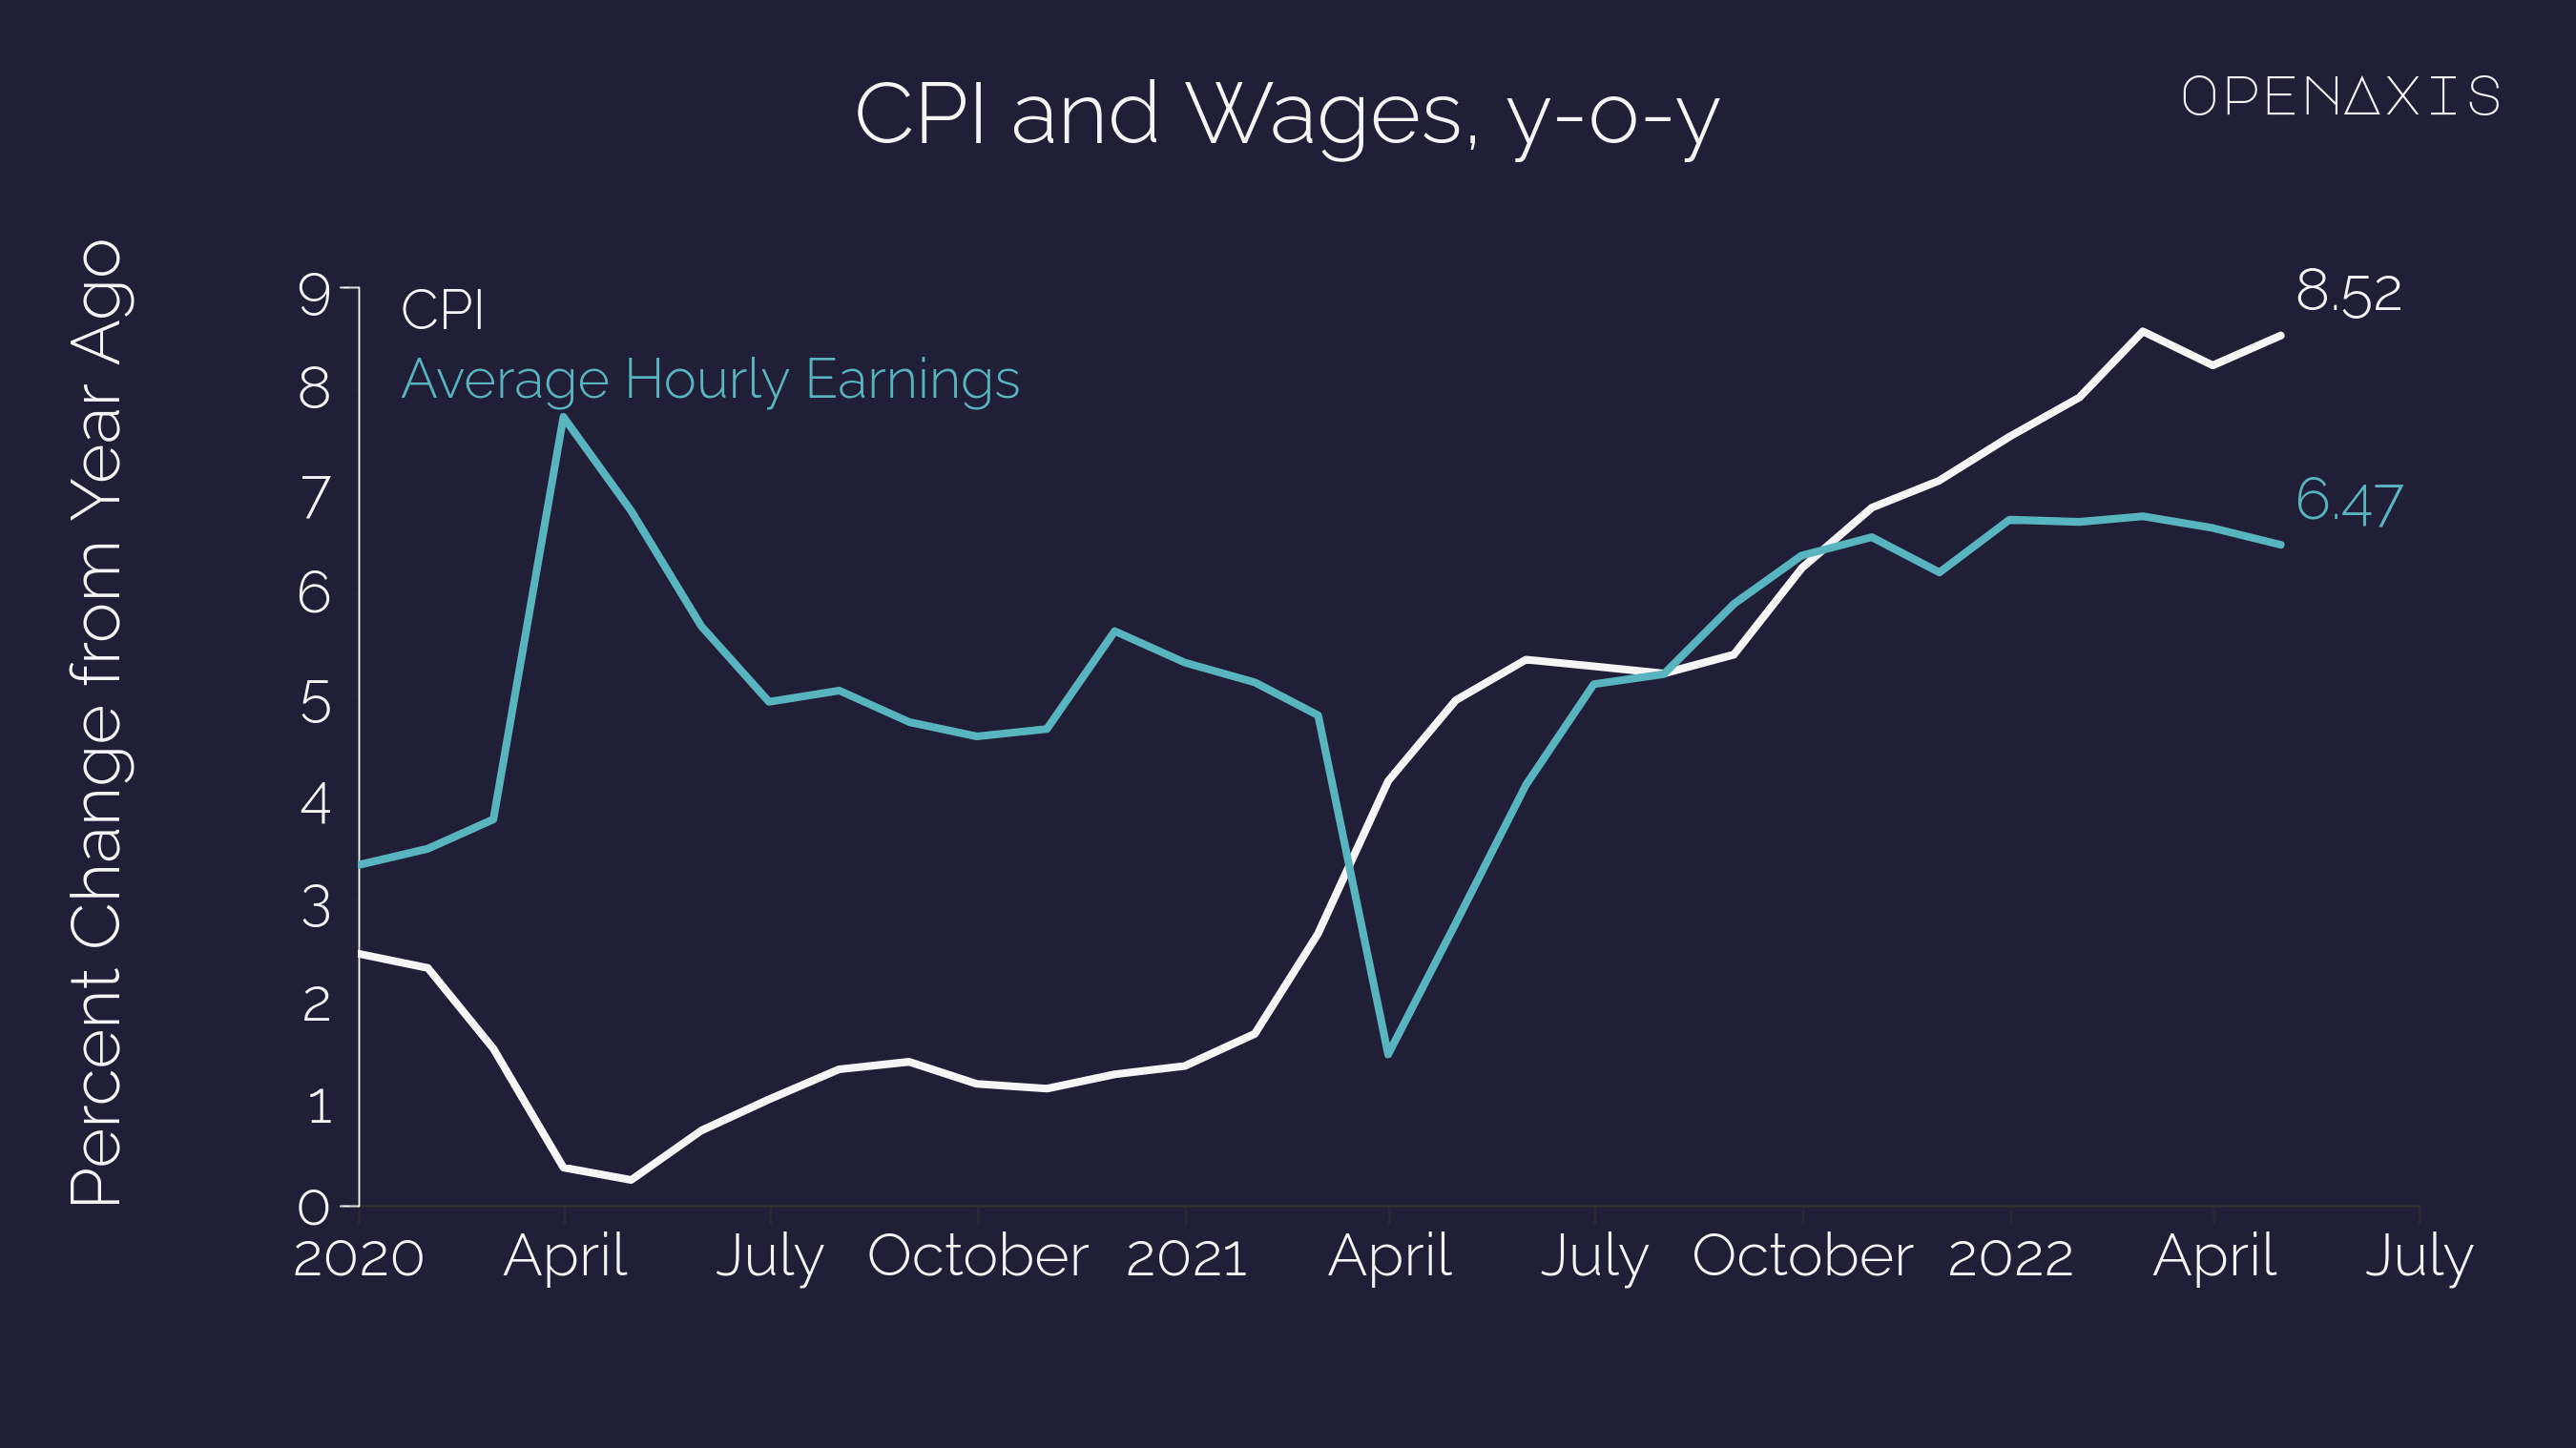 <p>Inflation rose further in May to 8.5% over a year ago, while the rate of wages increases actually cooled slightly, rising only 6.5% compared to a year ago.</p><p><br /></p><p>Source: <a href="/data/3426" target="_blank">U.S. Bureau of Labor Statistics</a></p>